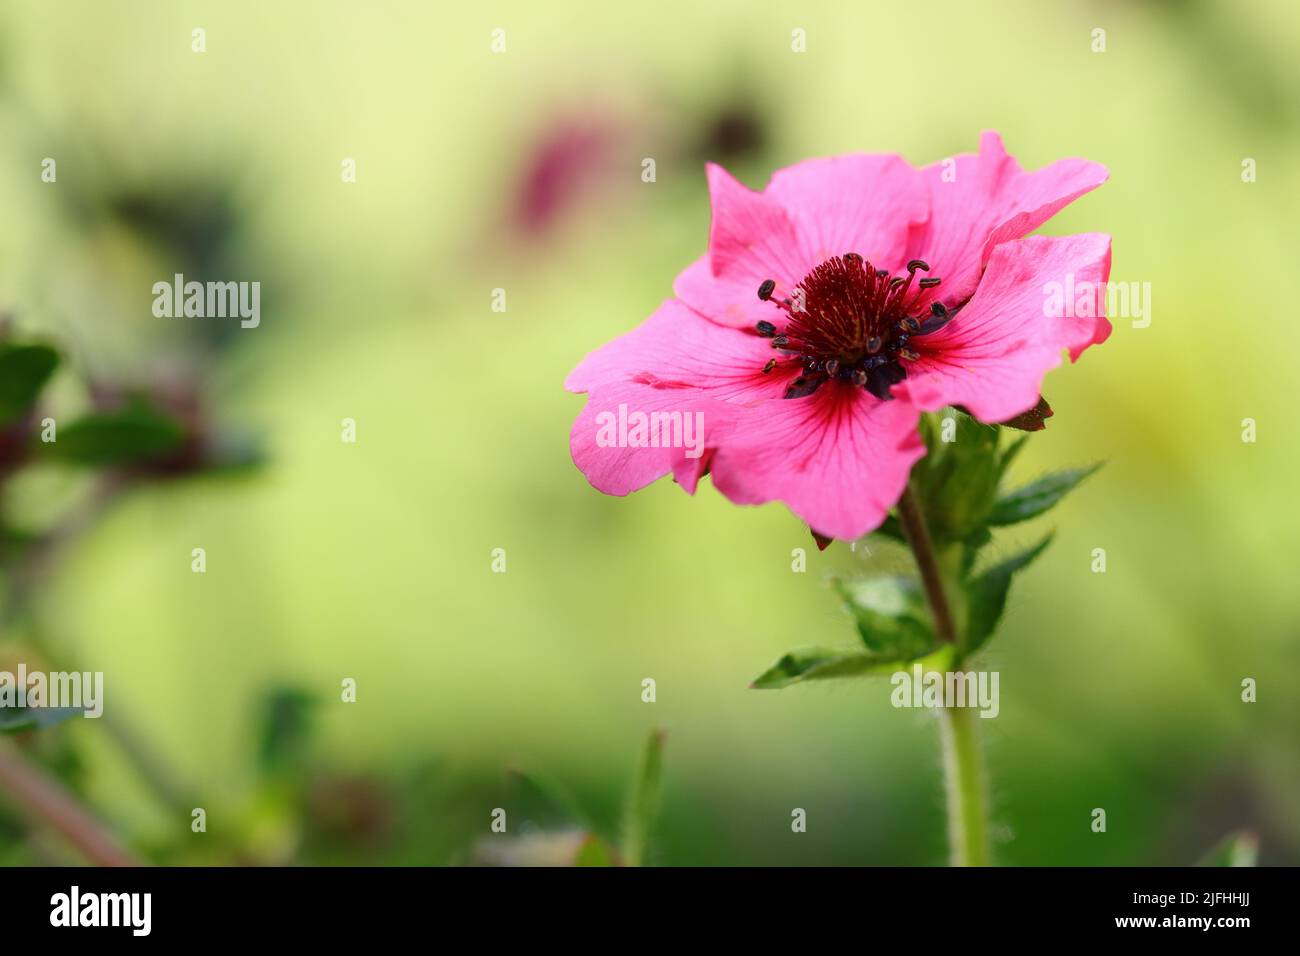 close-up of a sunlit potentilla nepalensis flower against a bright blurred background Stock Photo